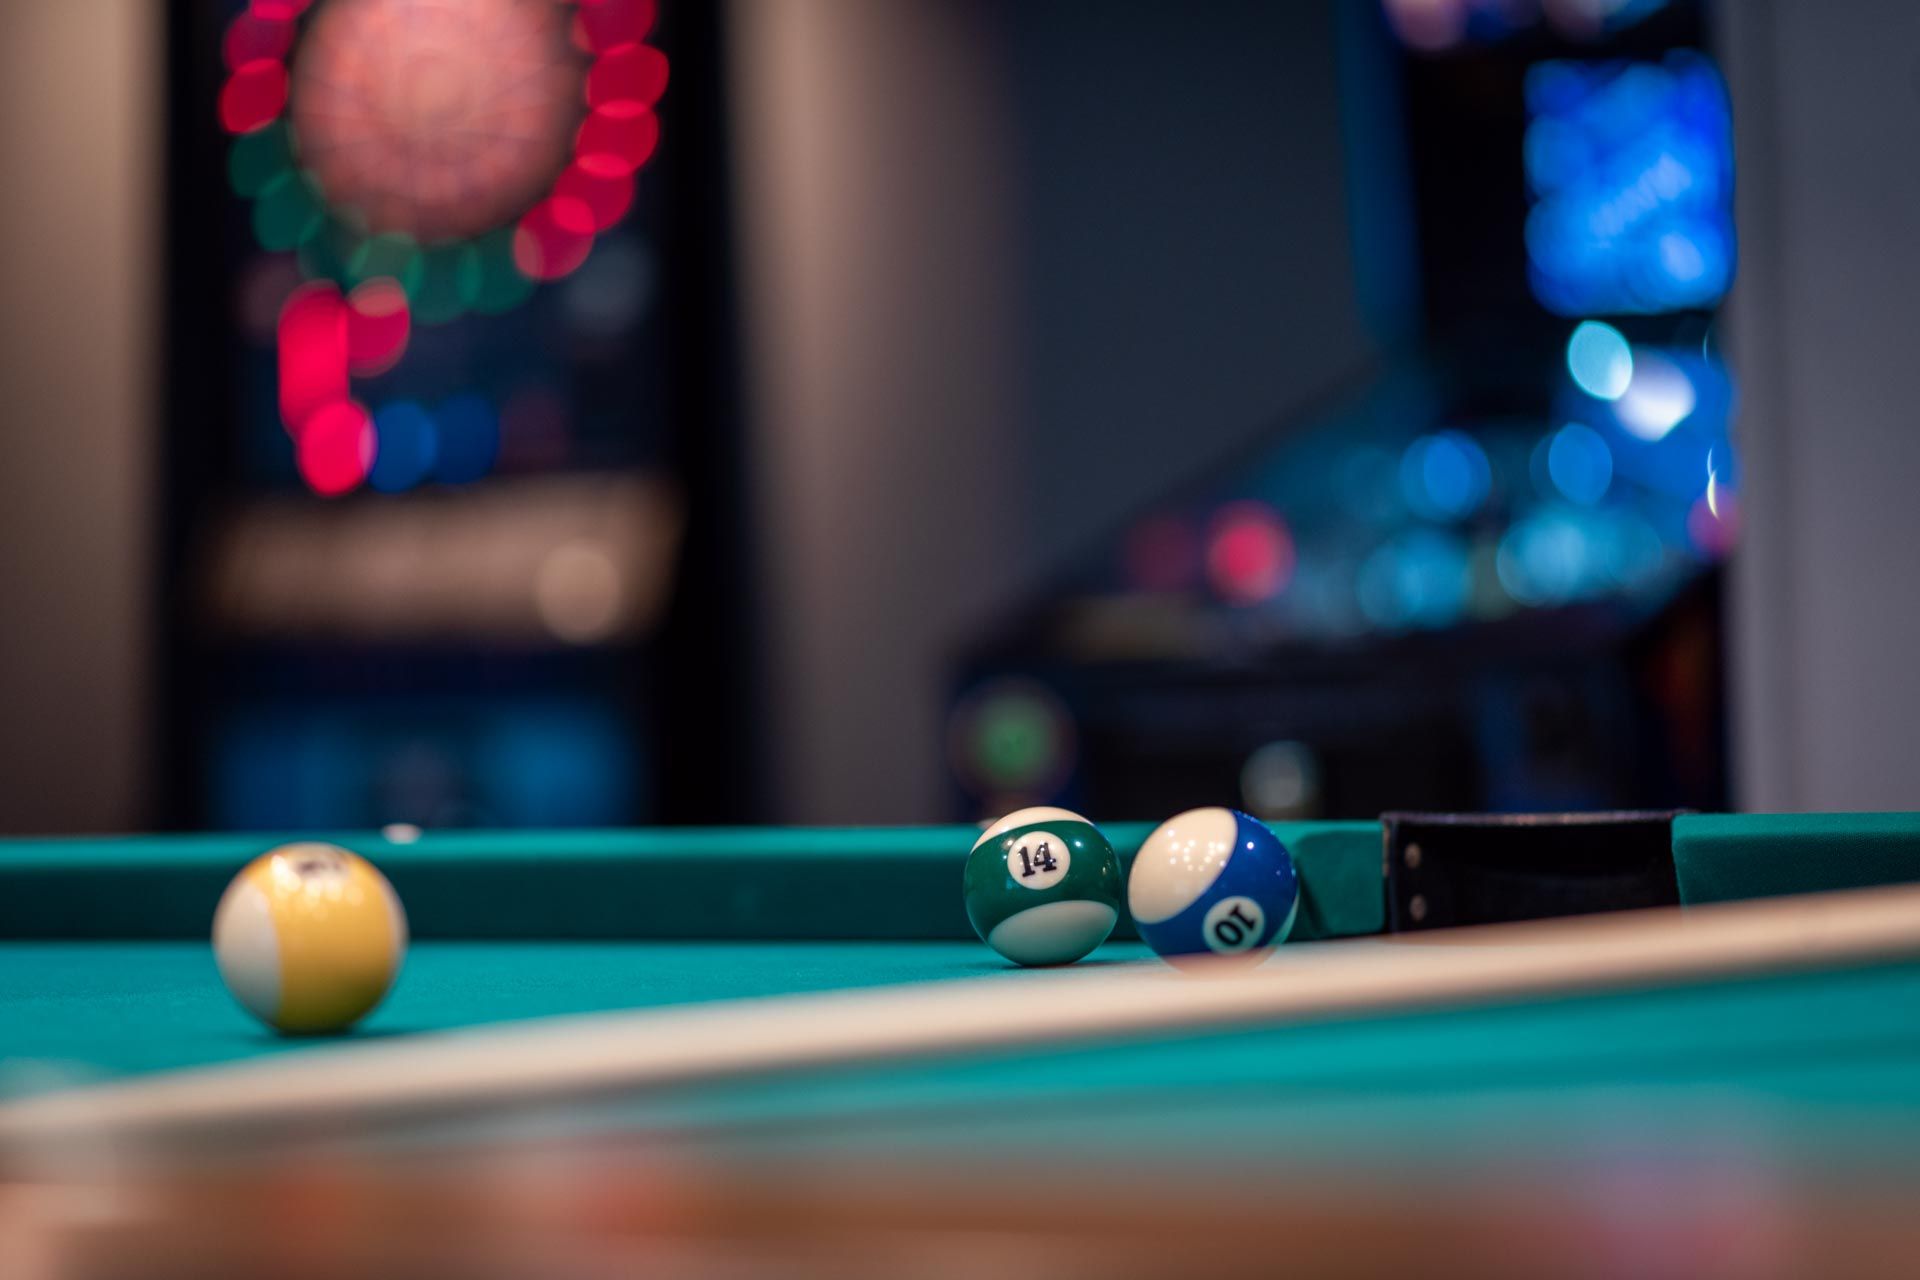 Games room with billiards, darts and pinball at Twins Bar & Lounge in St. Johann im Pongau